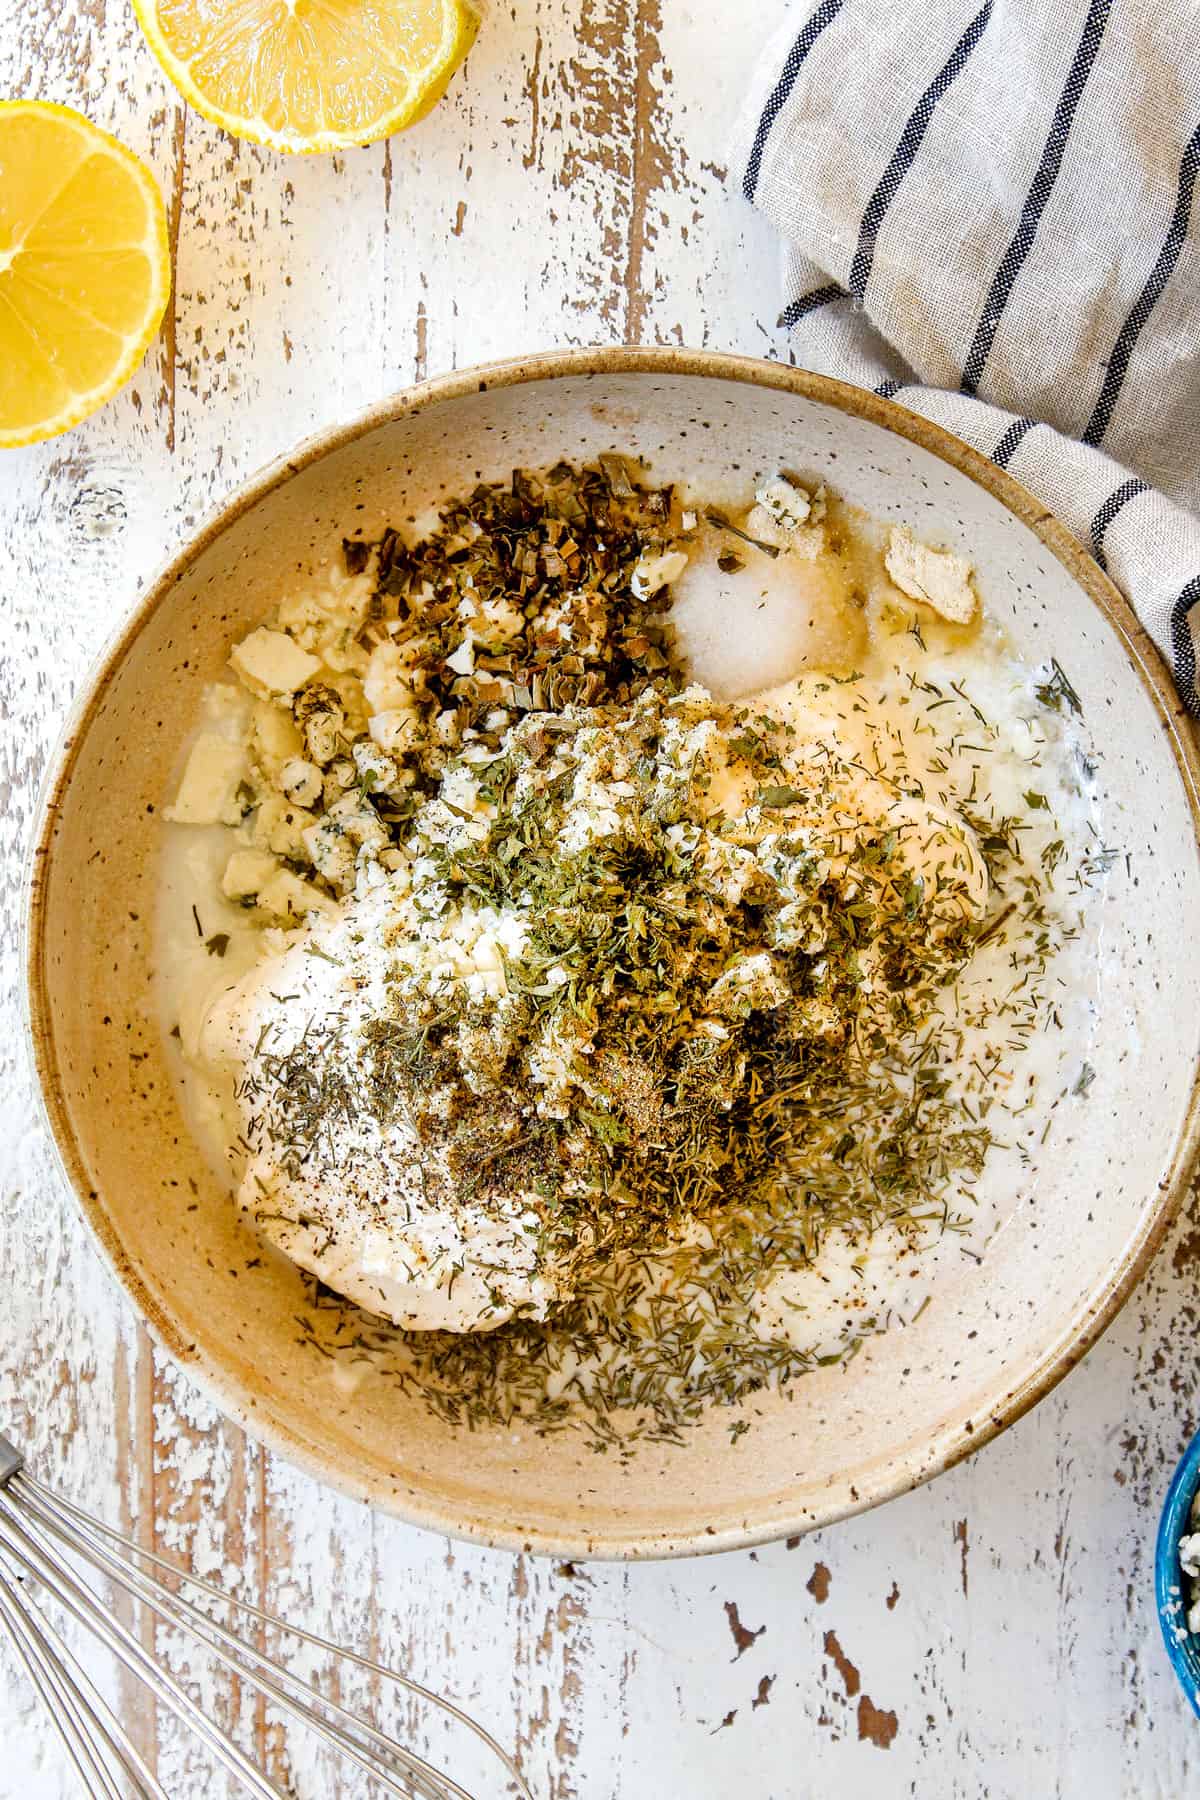 showing how to make blue cheese dressing by whisking blue cheese, mayonnaise, Greek yogurt, chives, parsley, dill, garlic powder, onion powder, salt and pepper together in a bowl